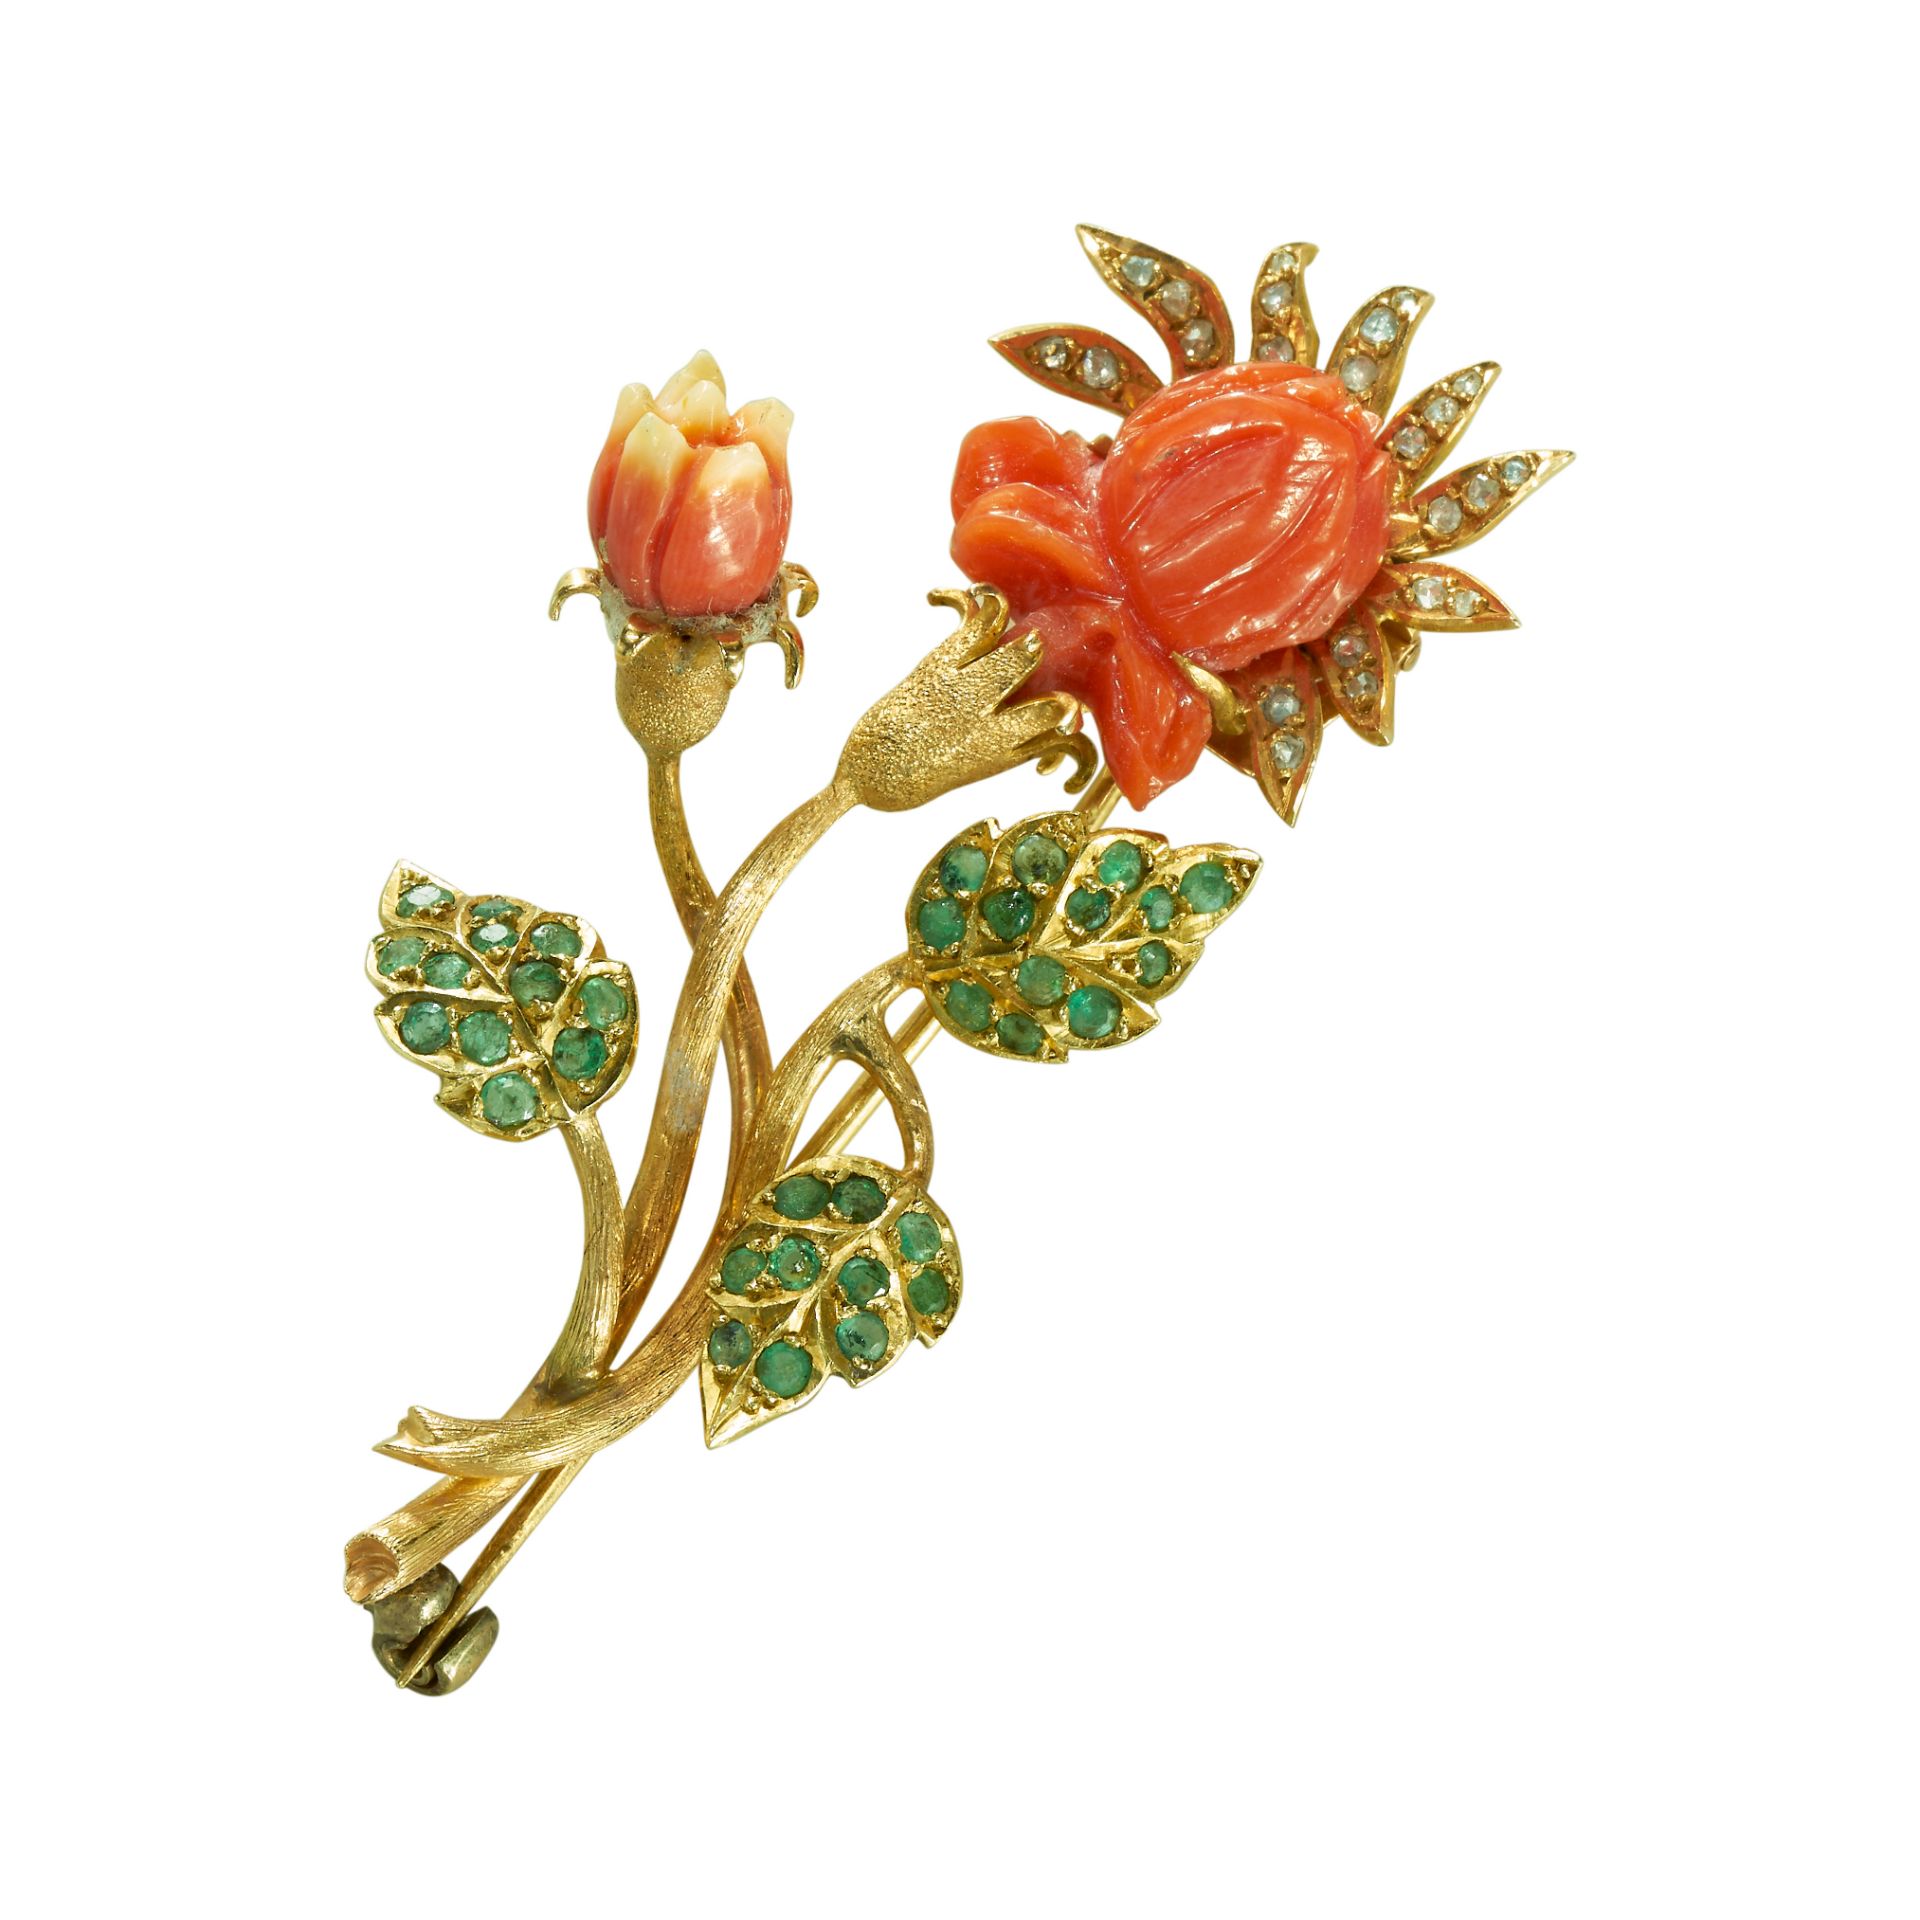 A CARVED CORAL, EMERALD AND ROSE CUT DIAMOND ROSE BROOCH.